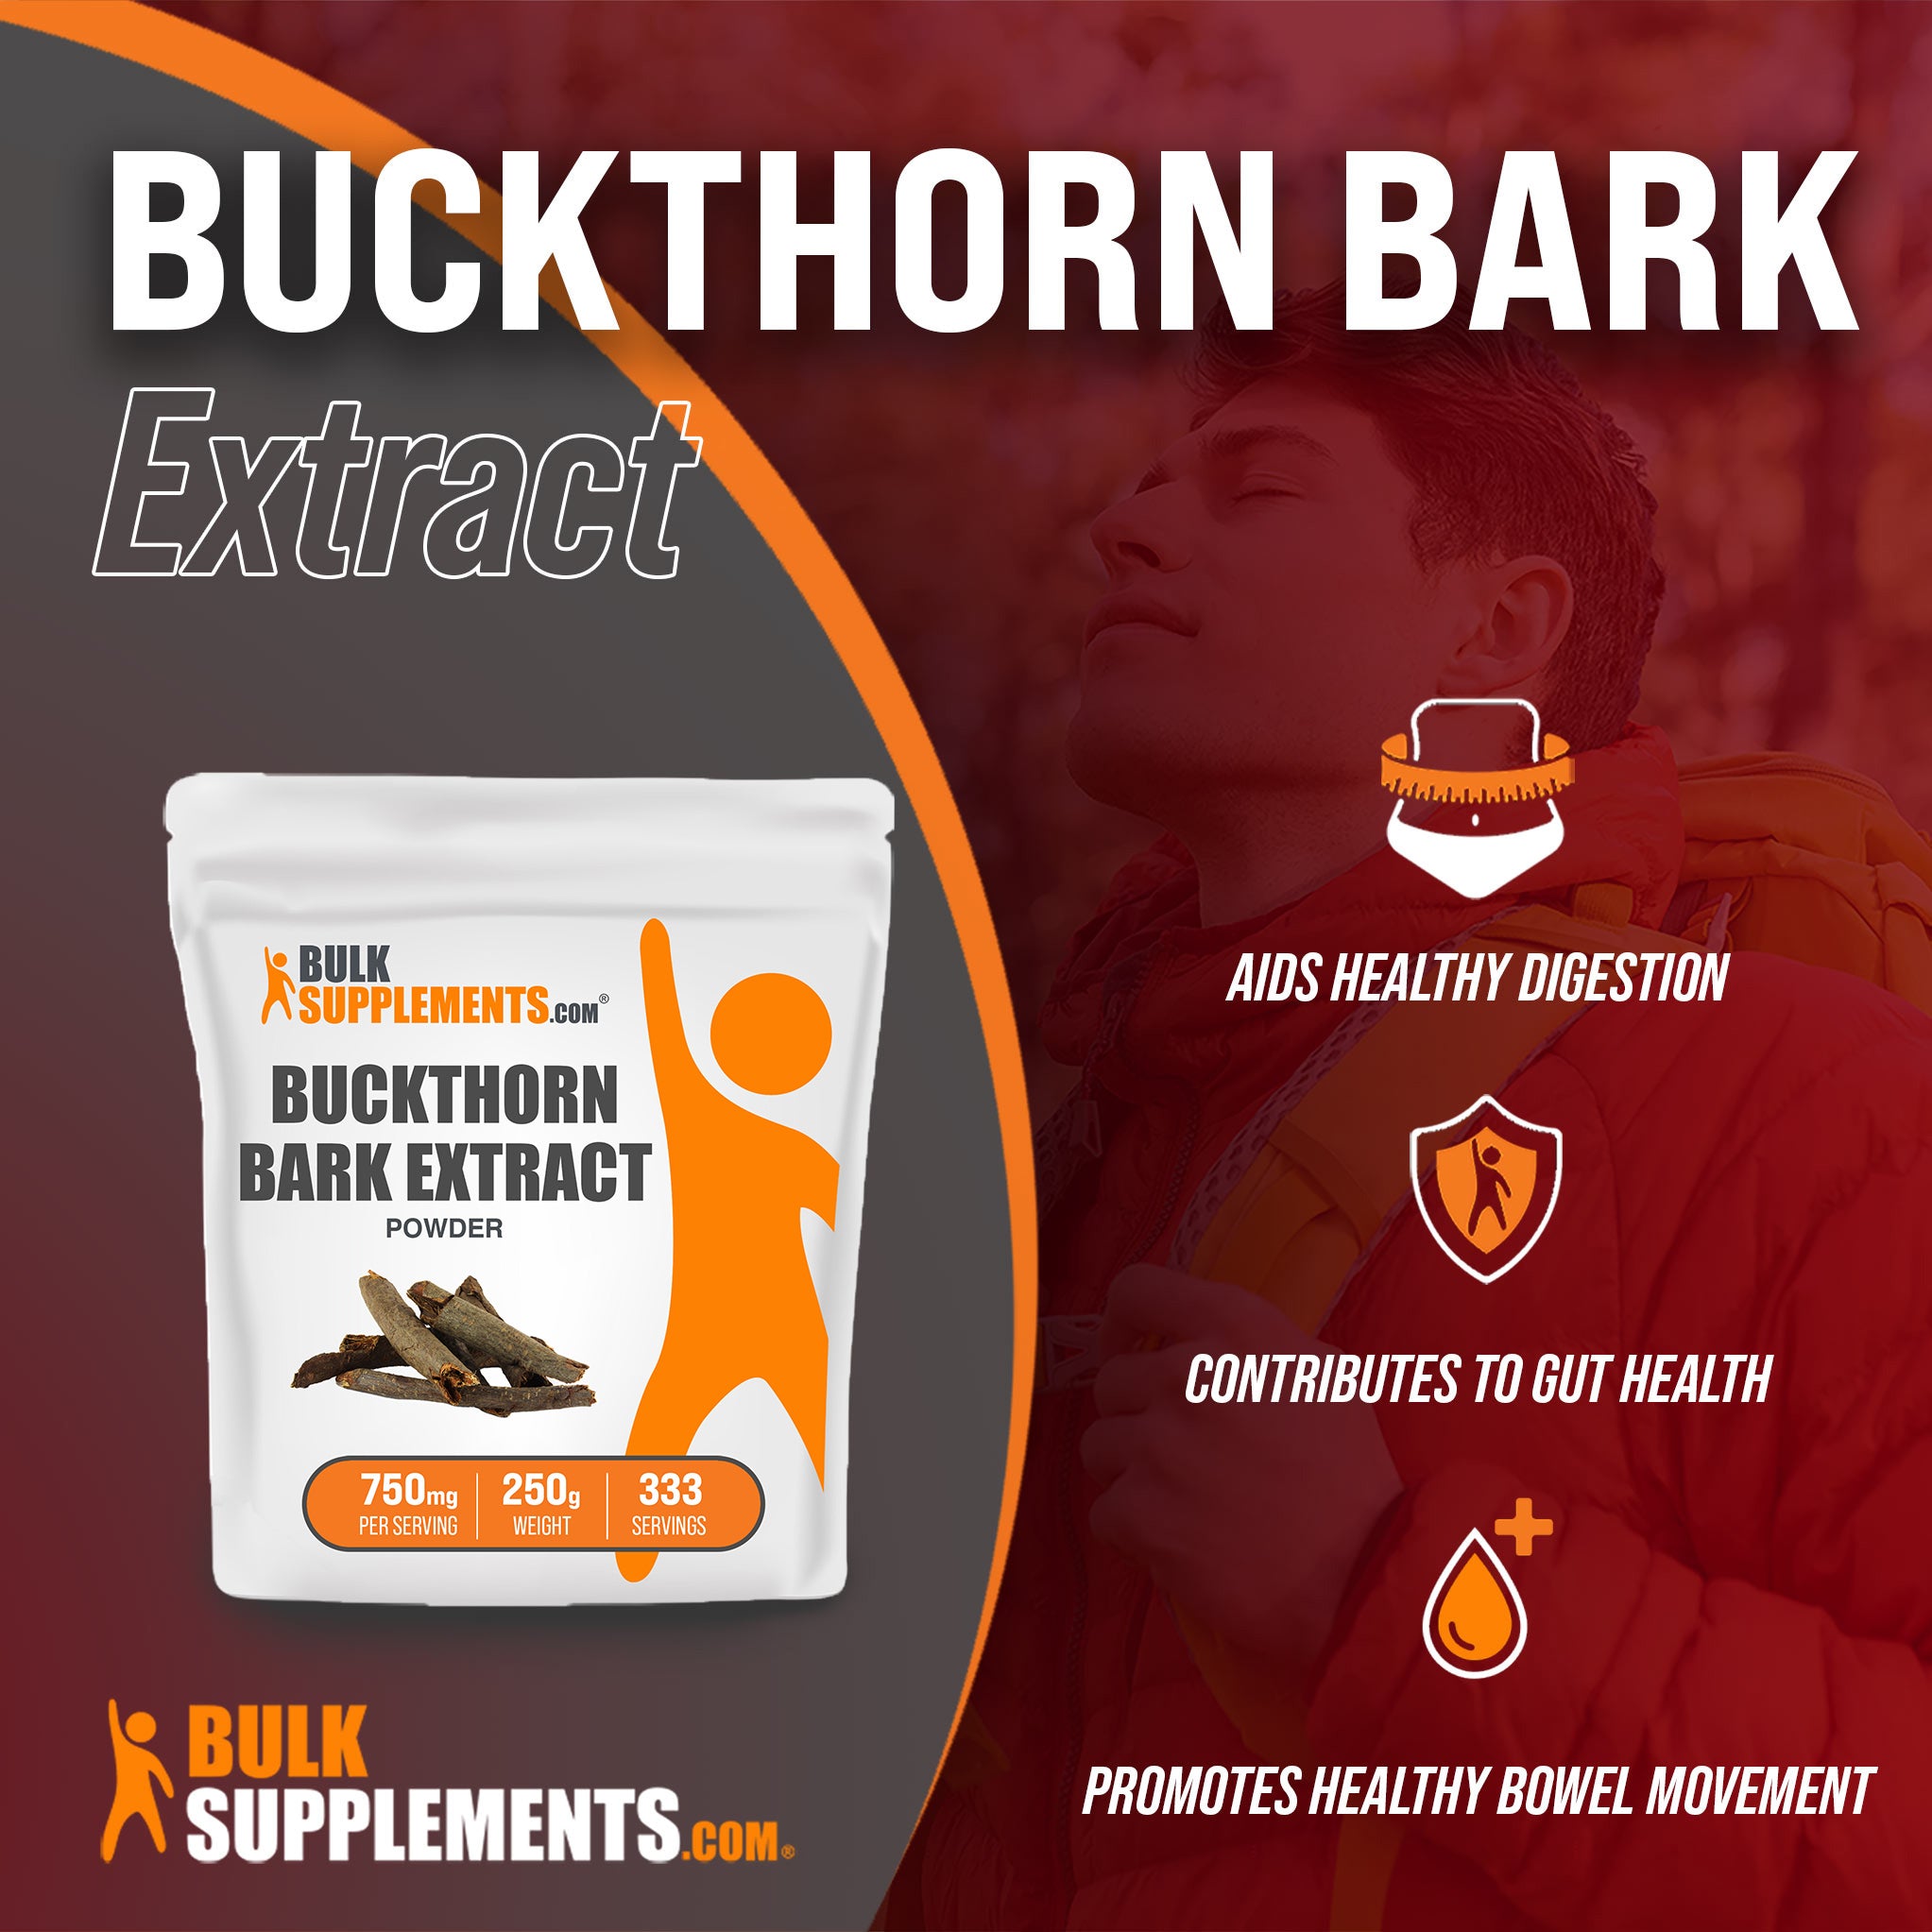 Benefits of Buckthorn Bark Extract; aids healthy digestion, contributes to gut health, promotes healthy bowel movement